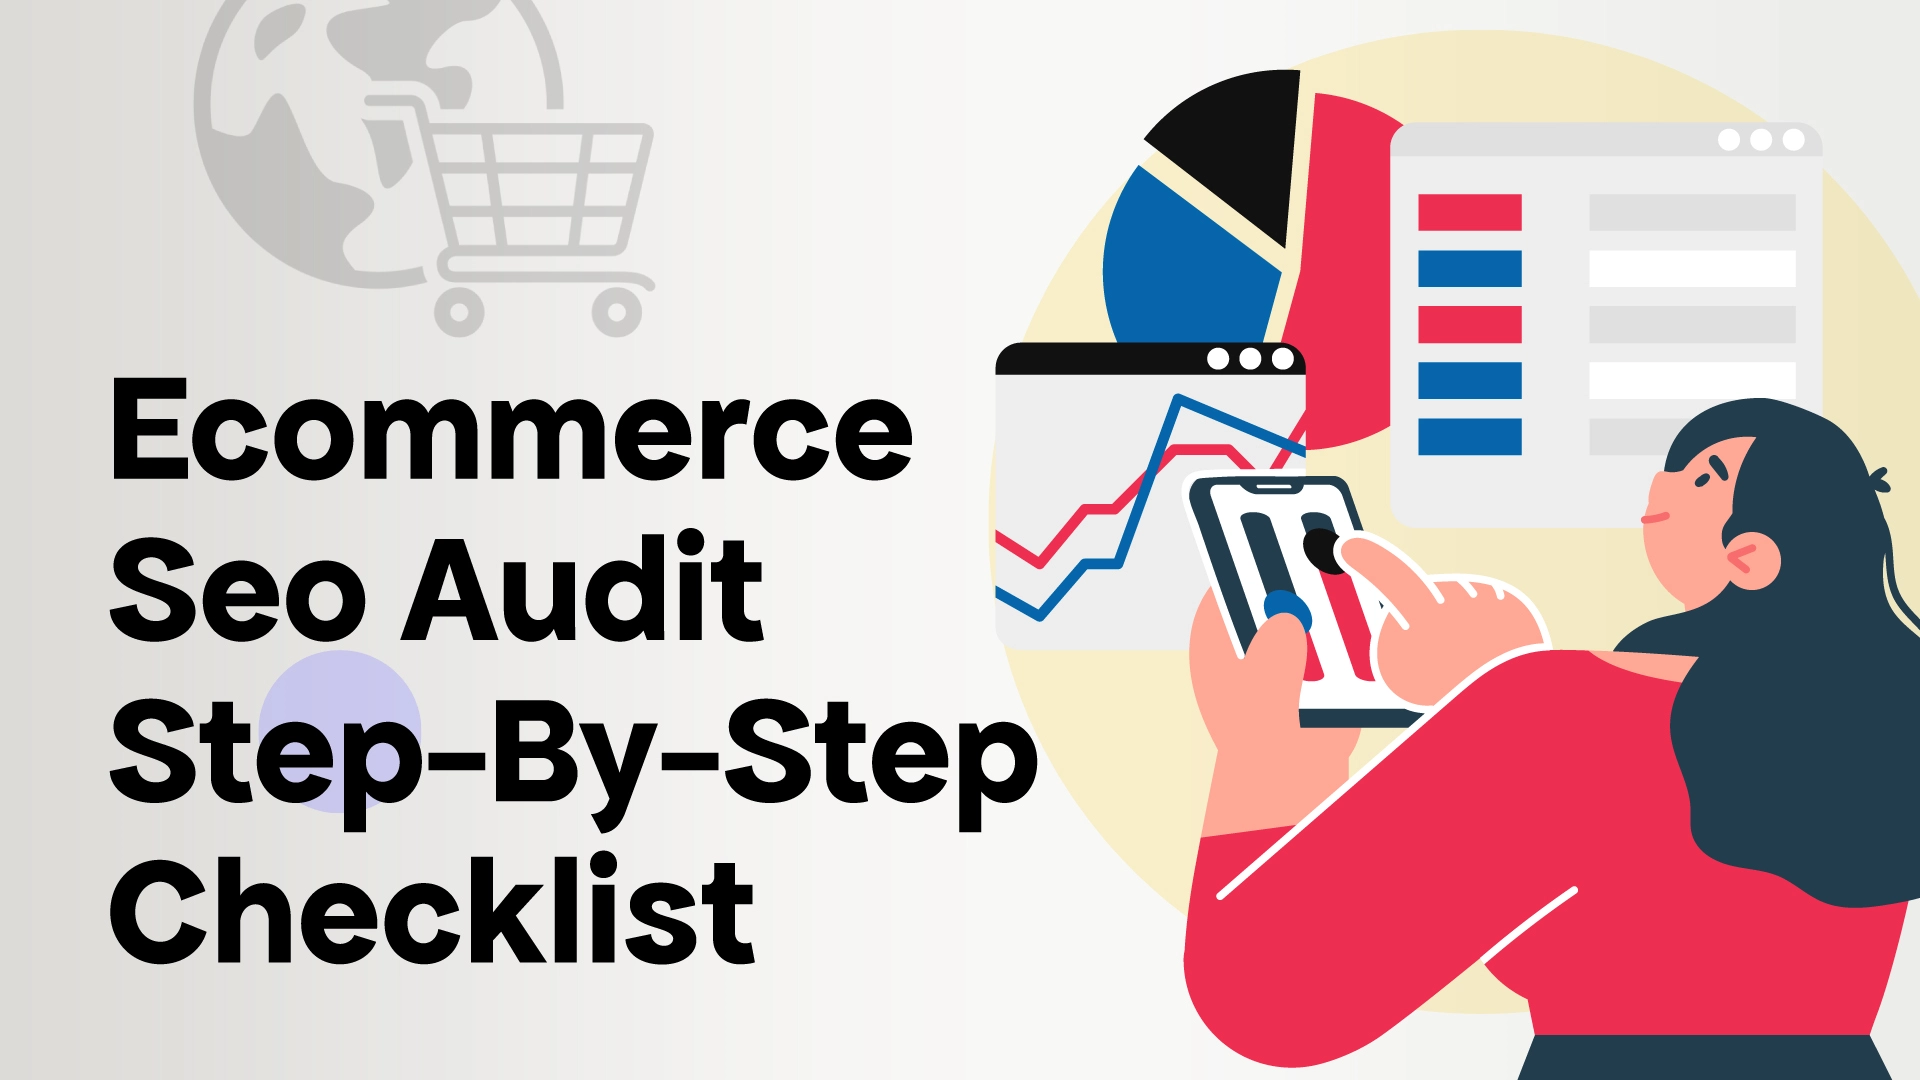 Ecommerce SEO Audit Step By Step Checklist